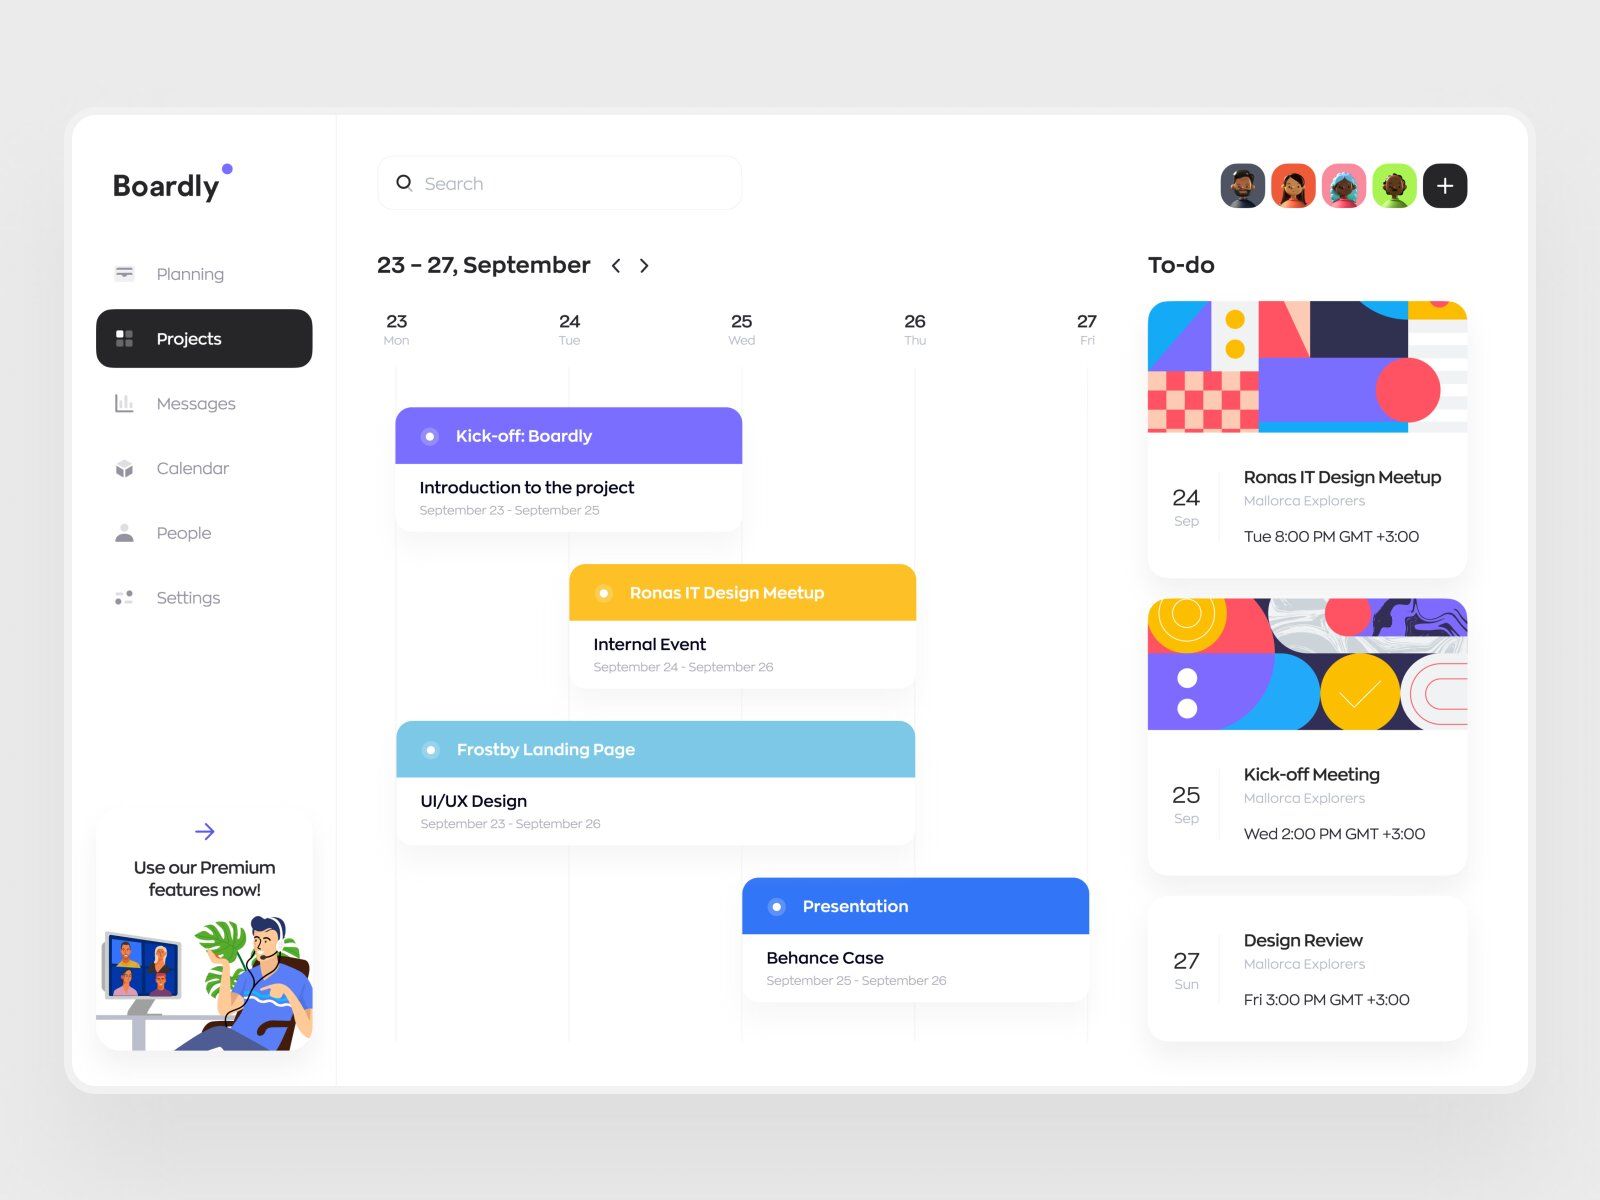 To create a CRM that improves cooperation you might use a shared dashboard  (*image by [Dmitry Lauretsky](https://dribbble.com/dlauretsky){ rel="nofollow" target="_blank" .default-md}*)